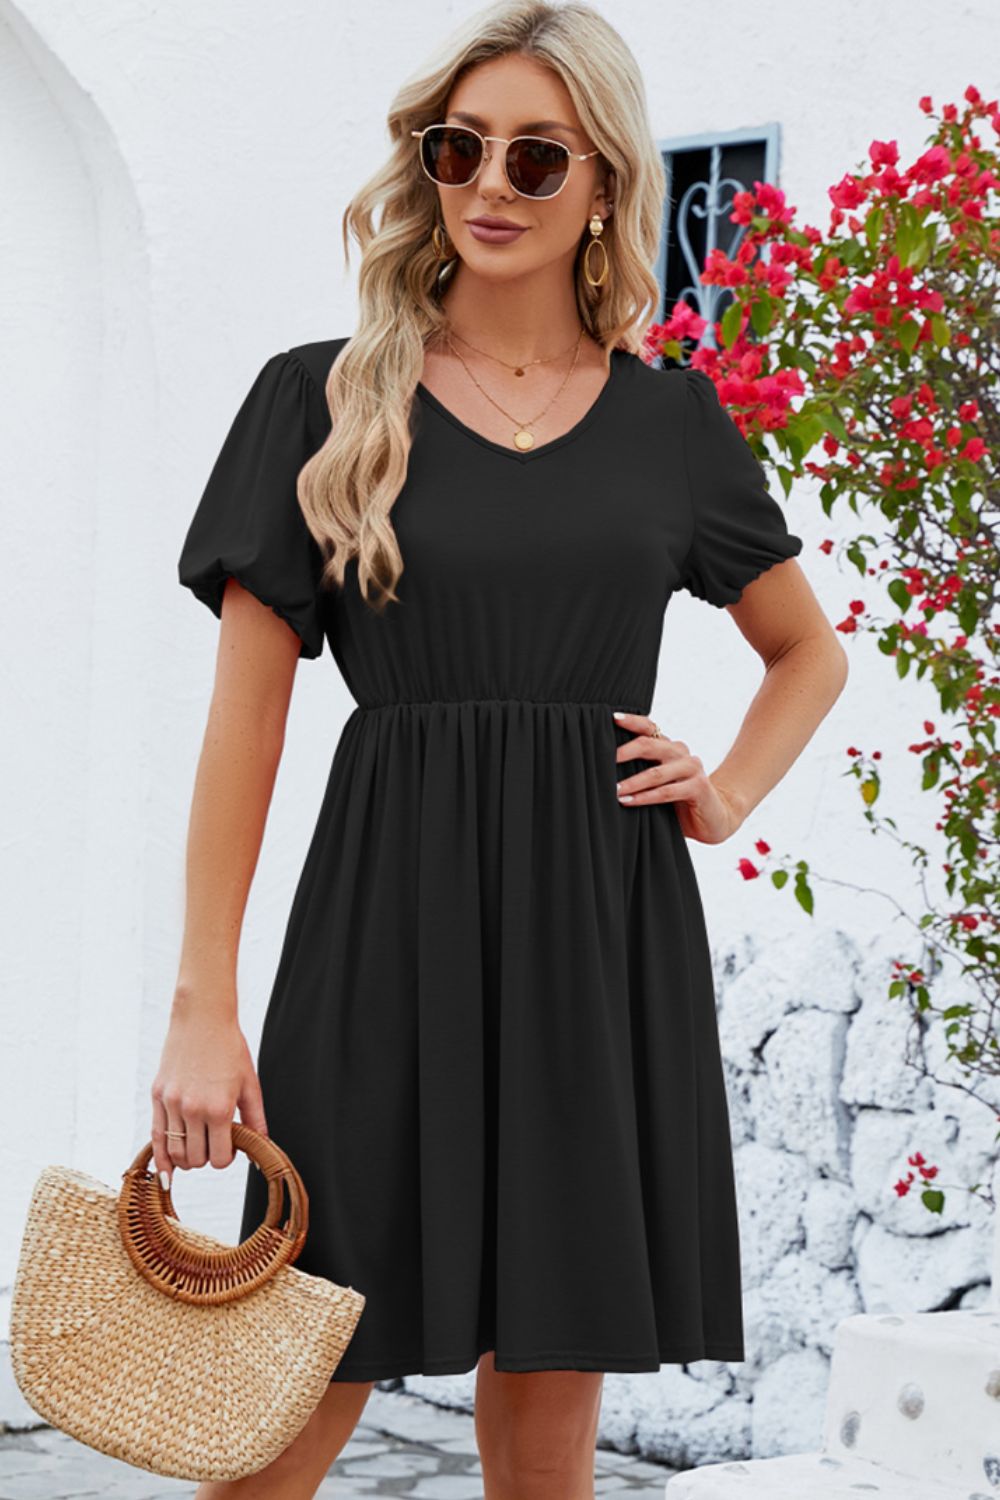 Black knee-length dress with puff sleeves and a gathered waist.